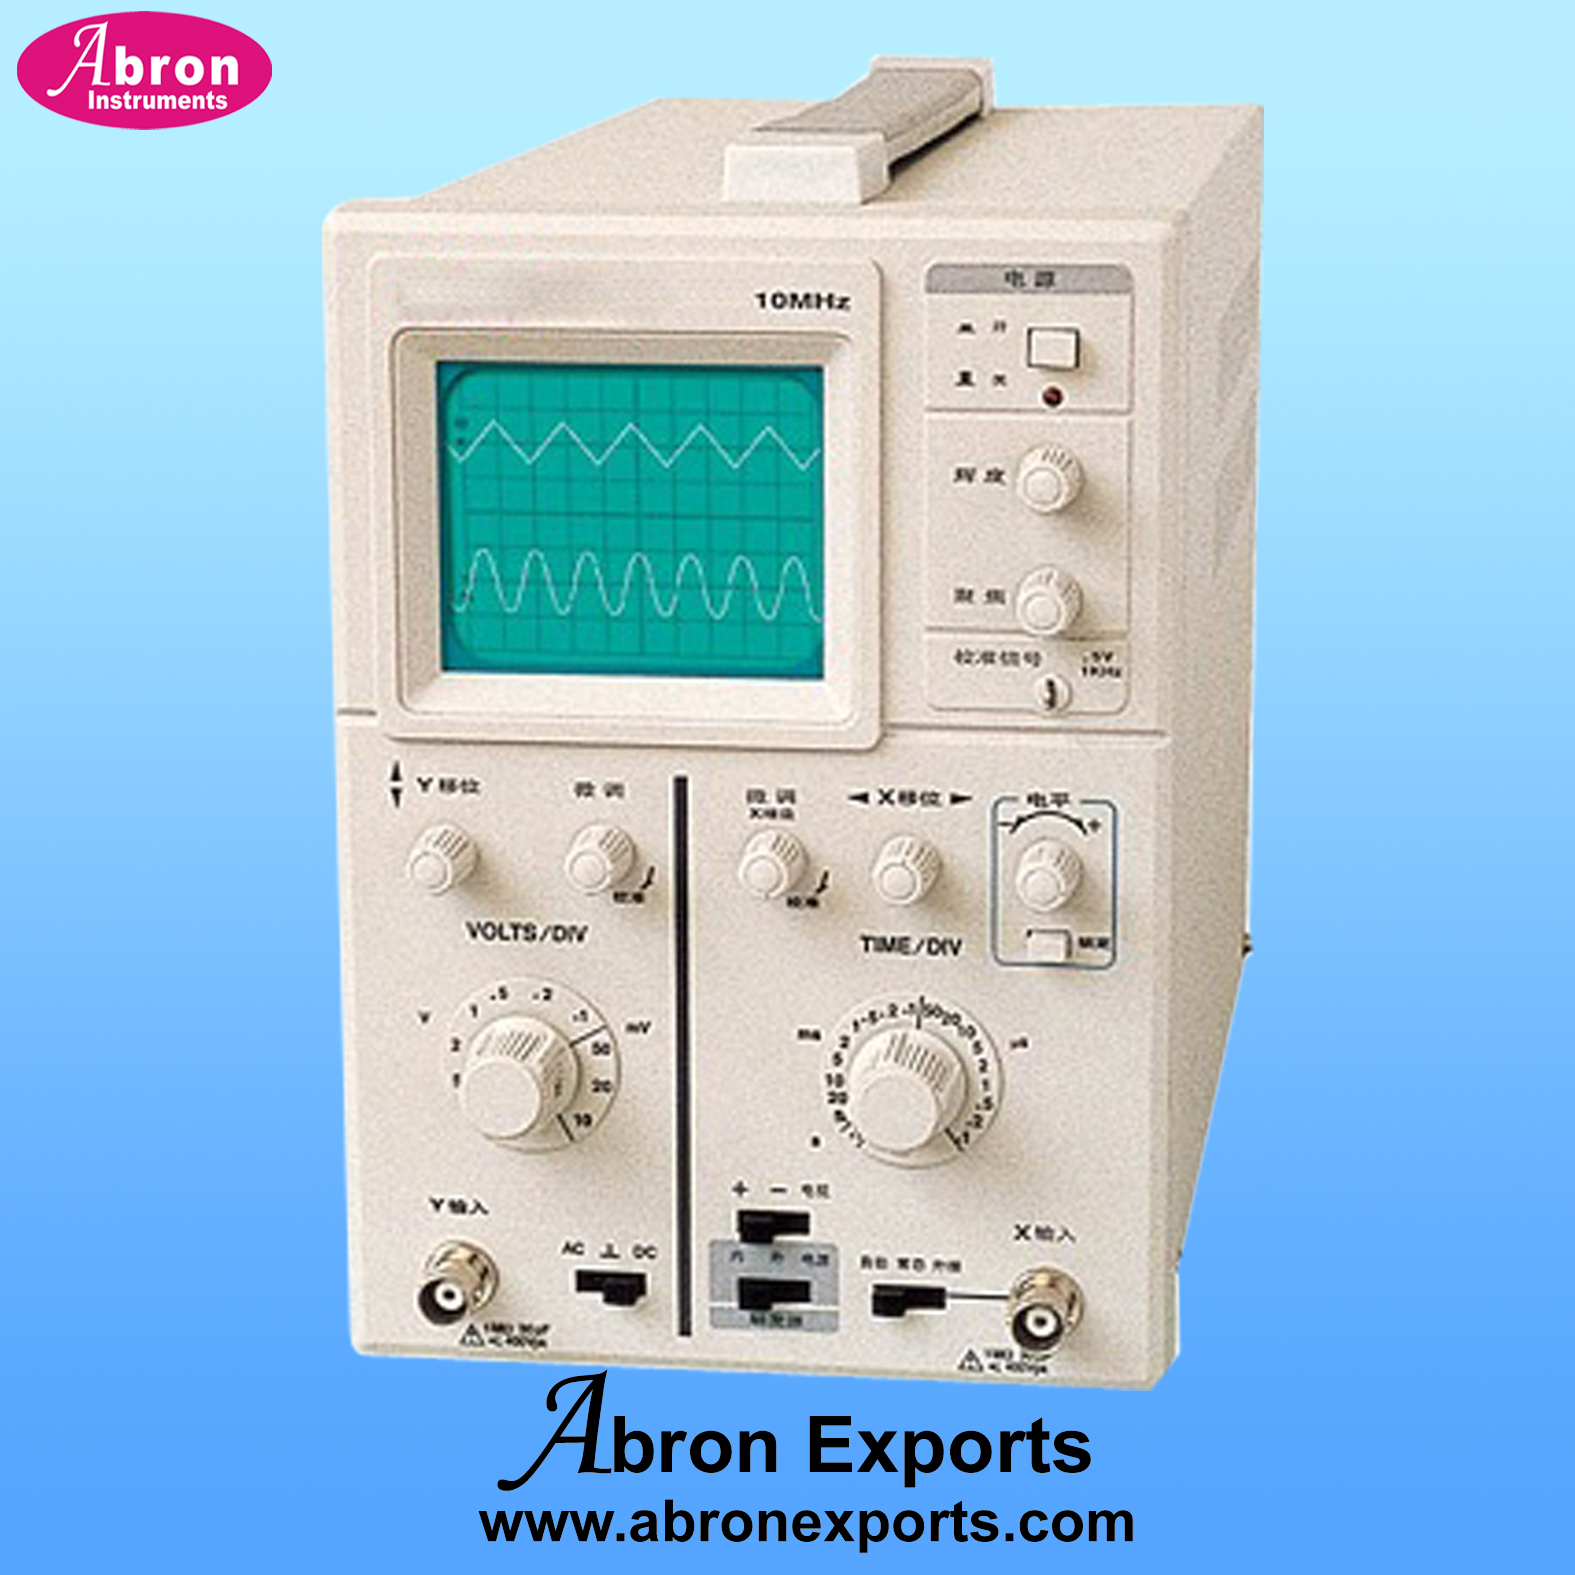 CRO Oscilloscope 10 MHz Single trace with probes Sweep, trig external internal, X-Y with probes AE-1340AH10